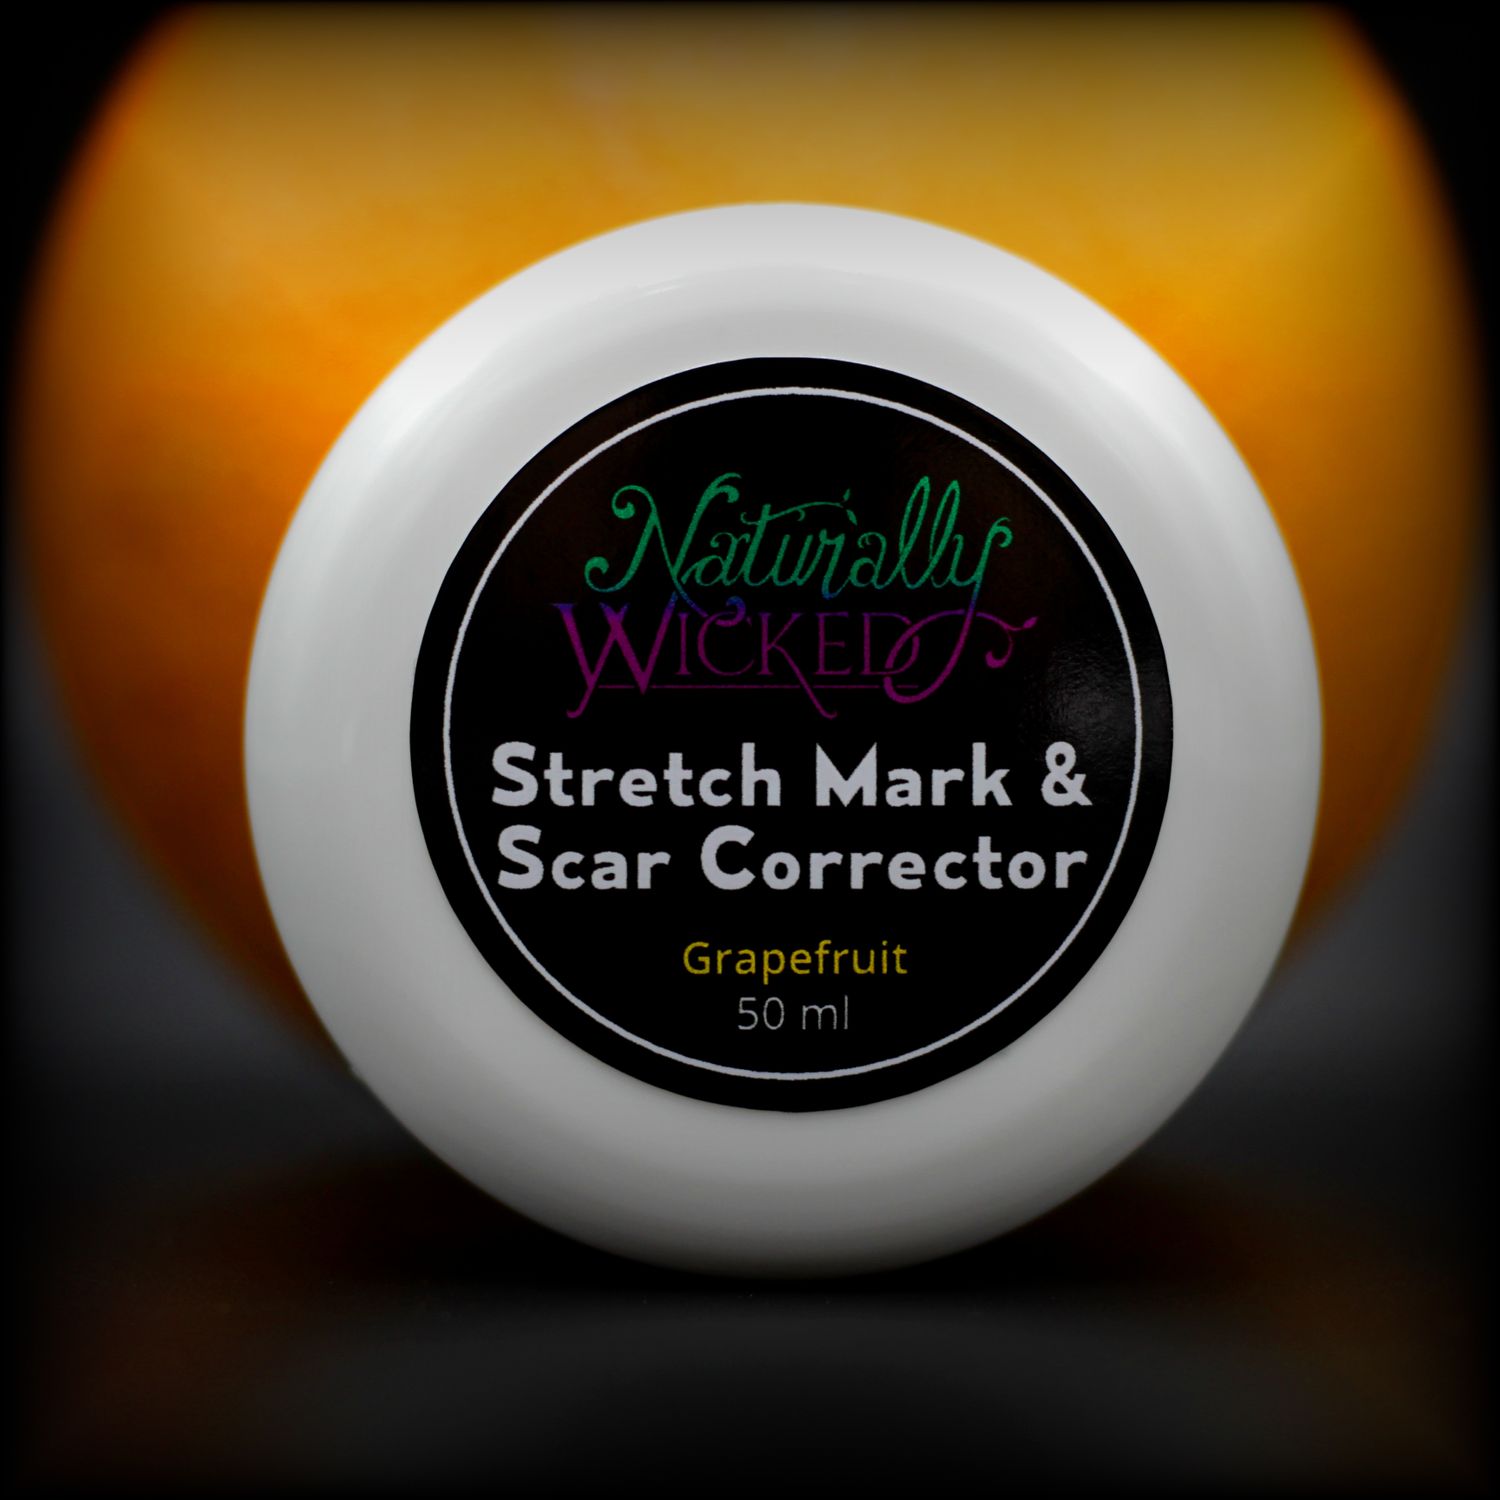 Naturally Wicked Stretch Mark & Scar Corrector Lid In Front Of A Whole Orange Grapefruit